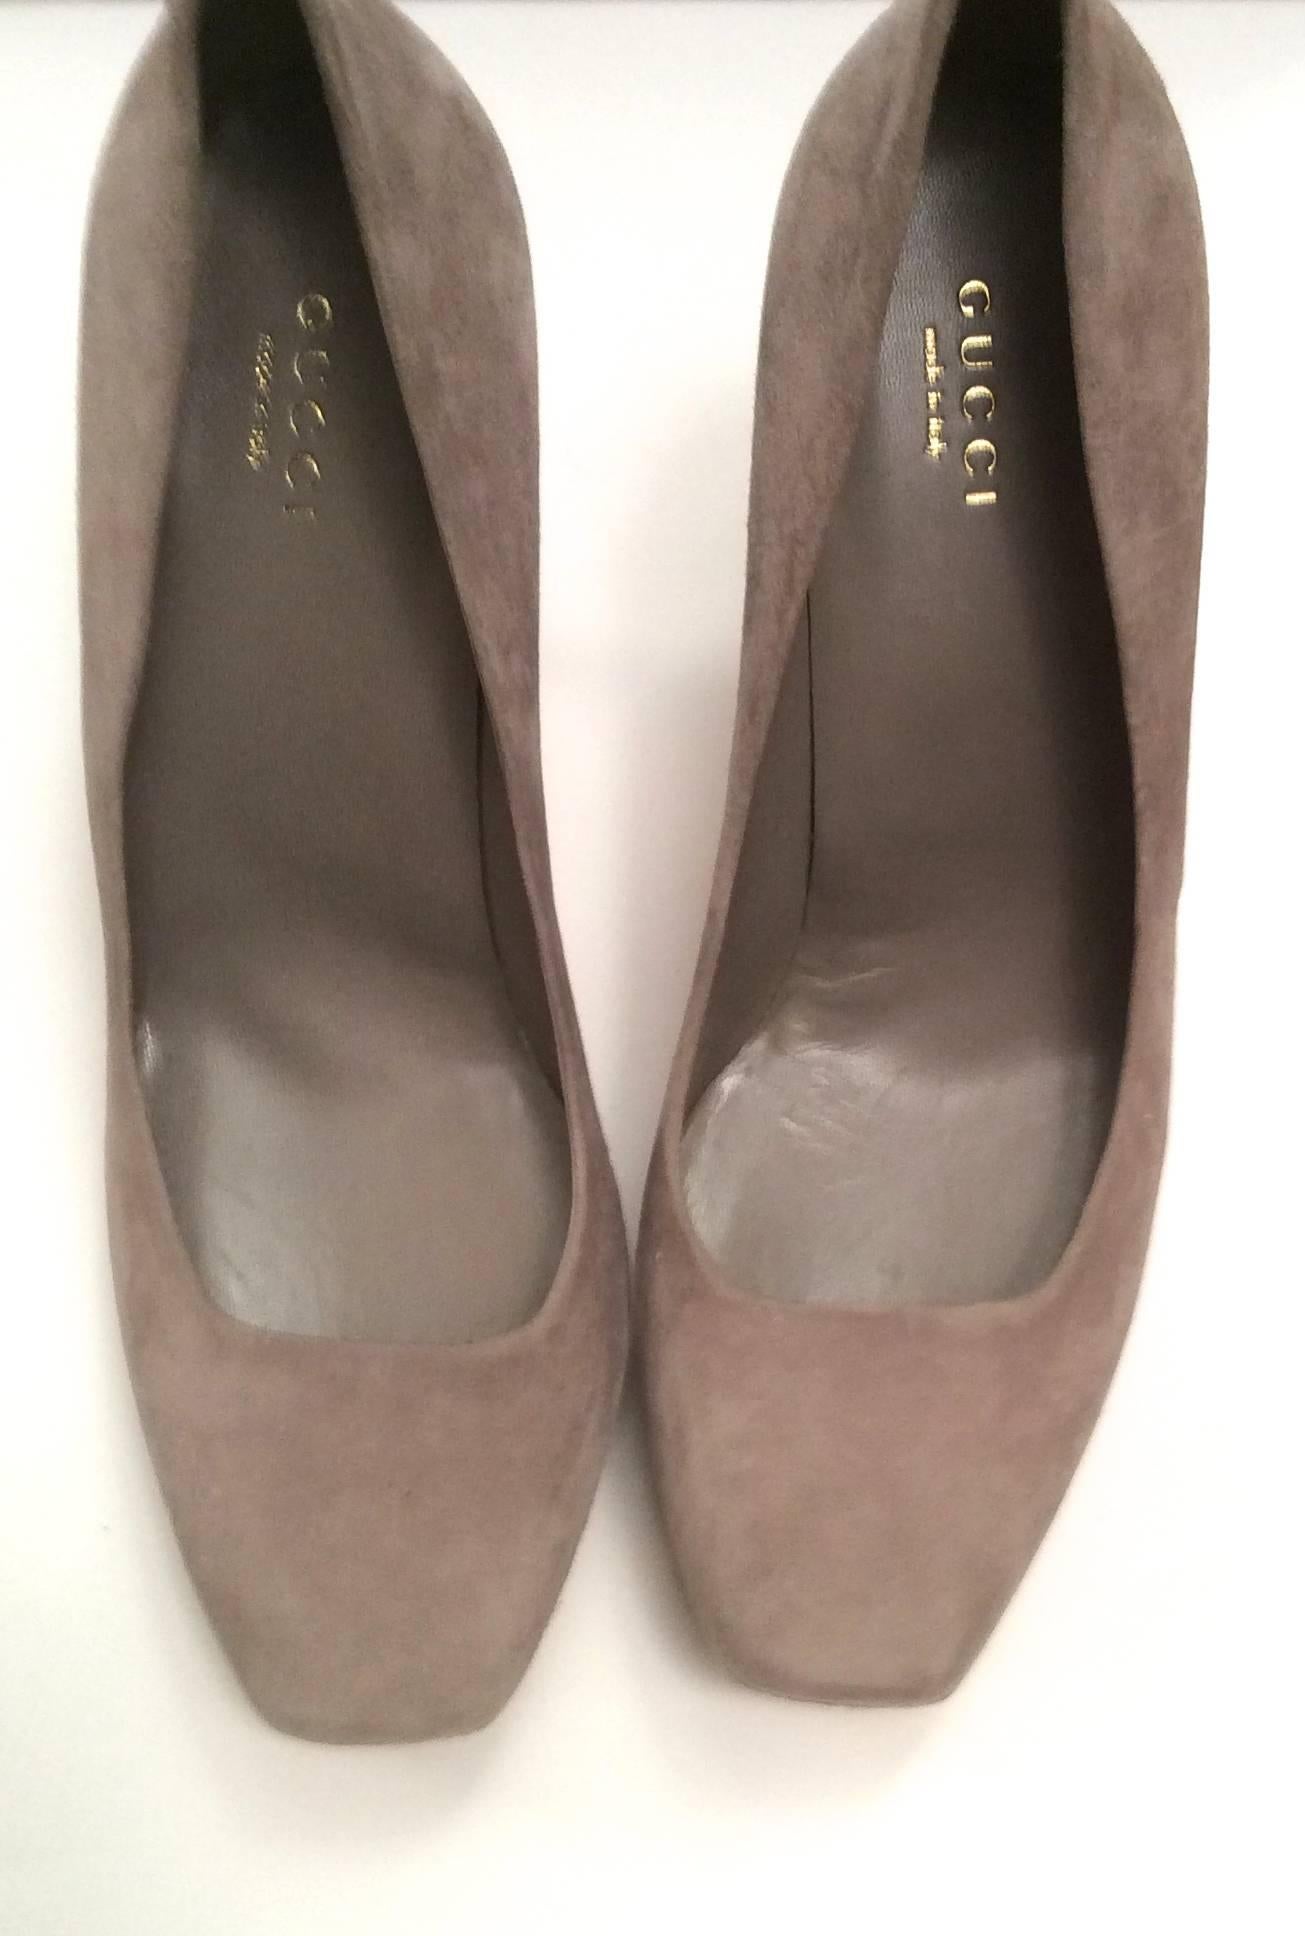 New Gucci Charlotte Pumps - Gray Suede Platform - Size 37 In New Condition For Sale In Boca Raton, FL